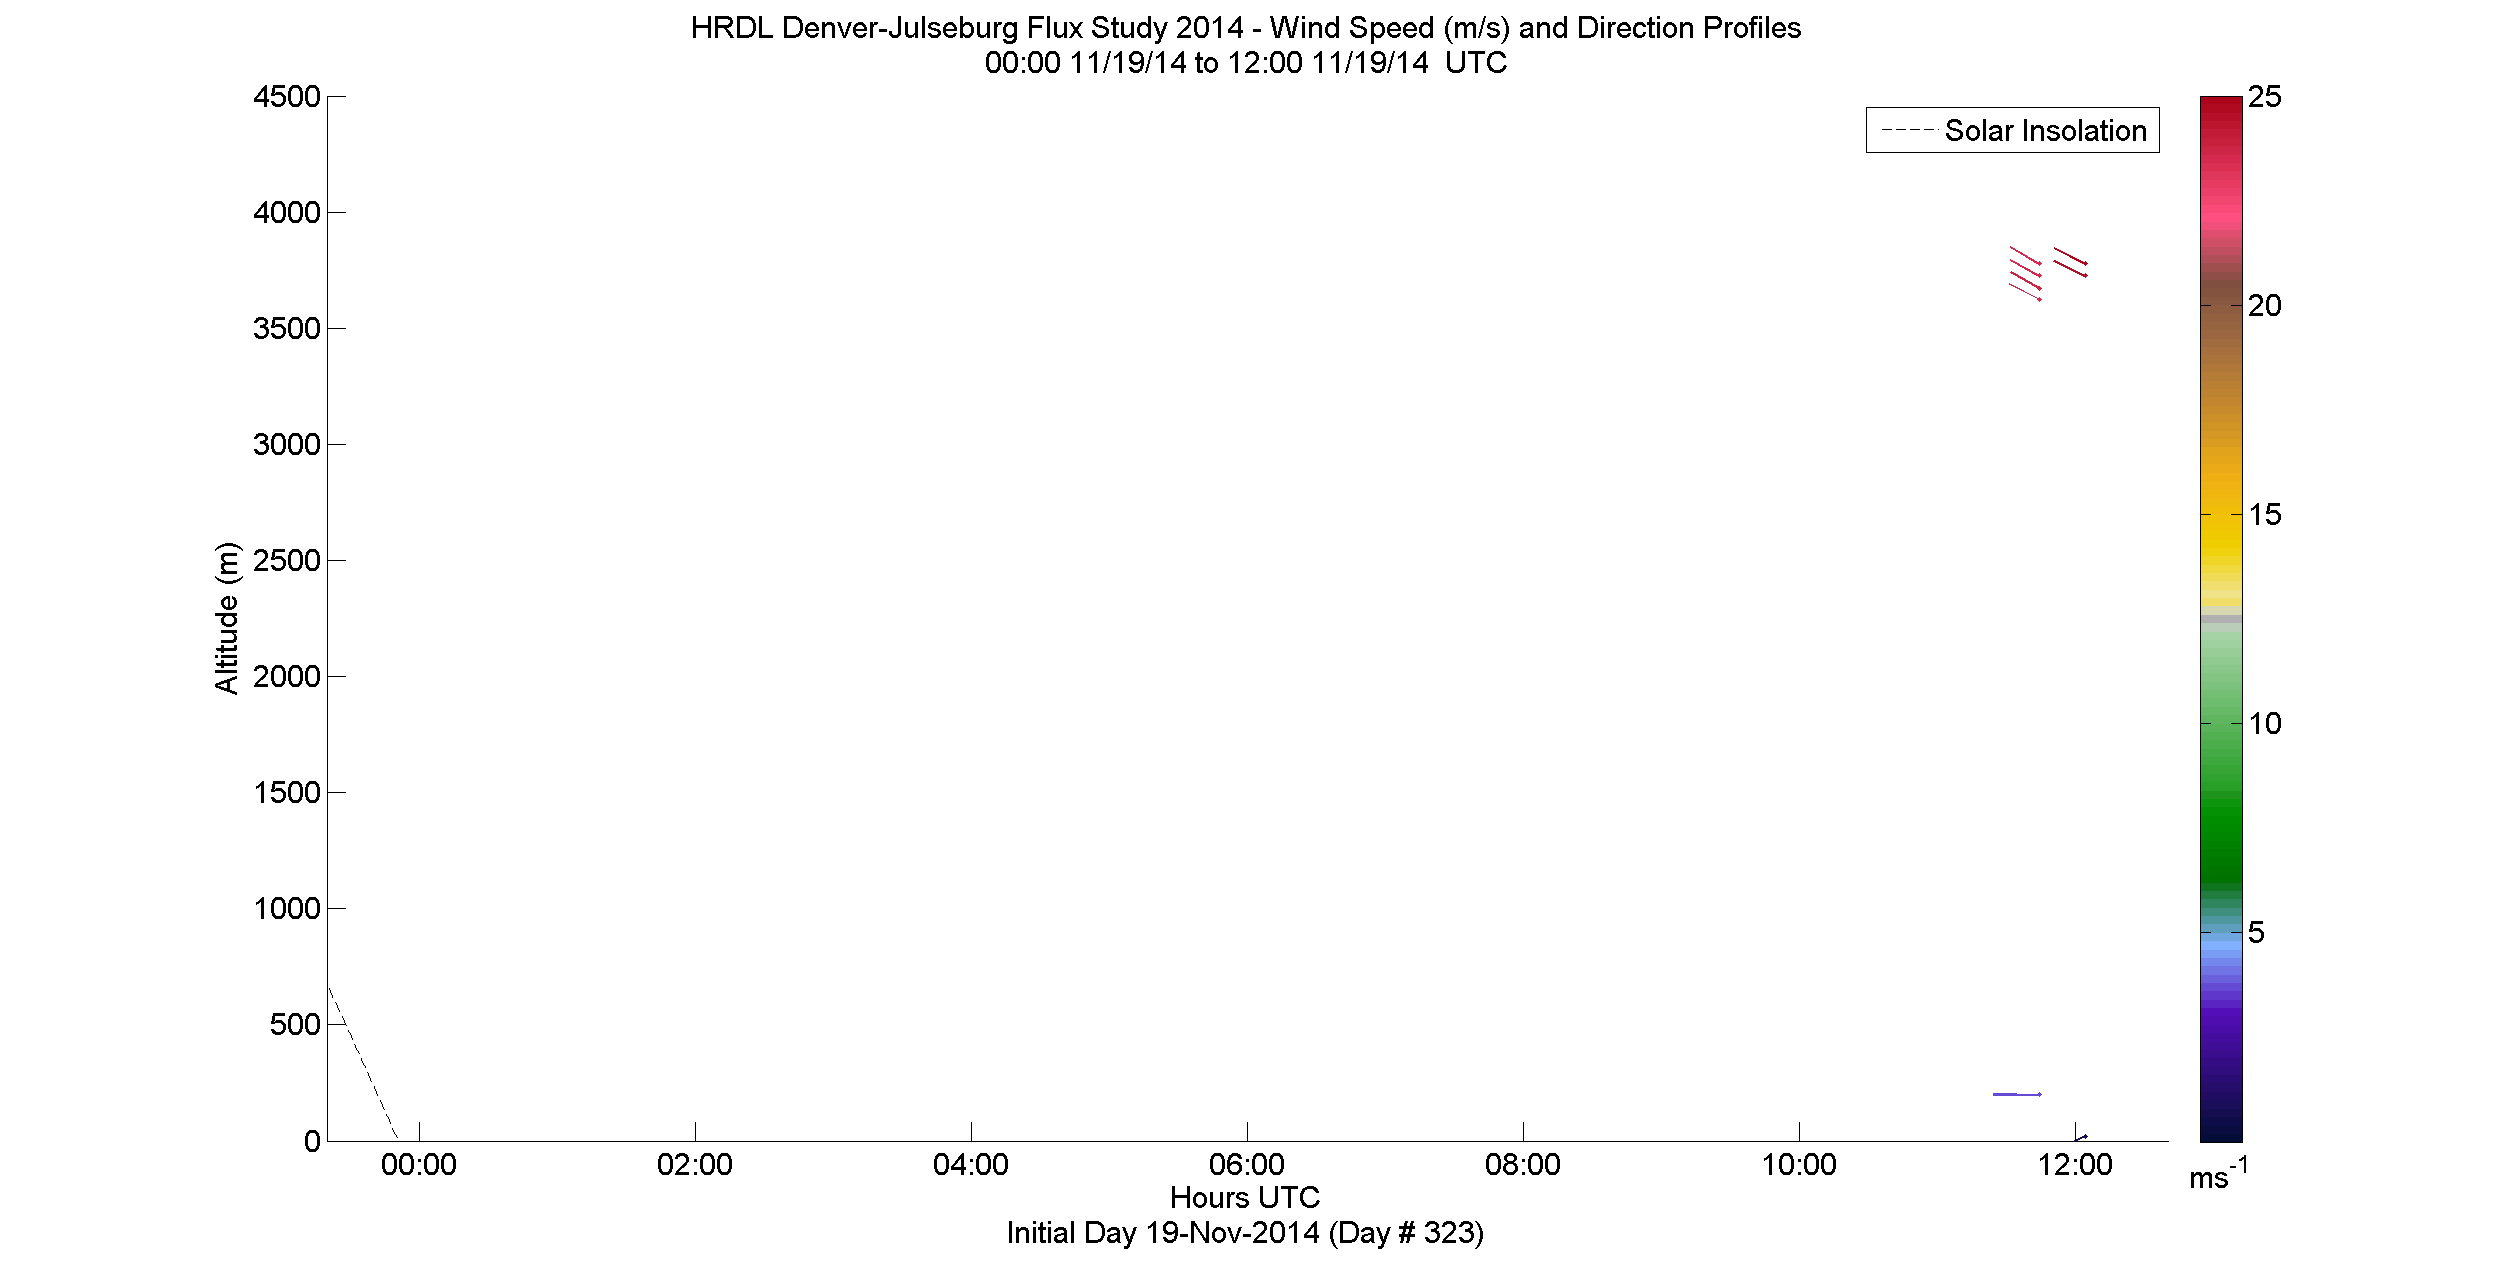 HRDL speed and direction profile - November 19 am